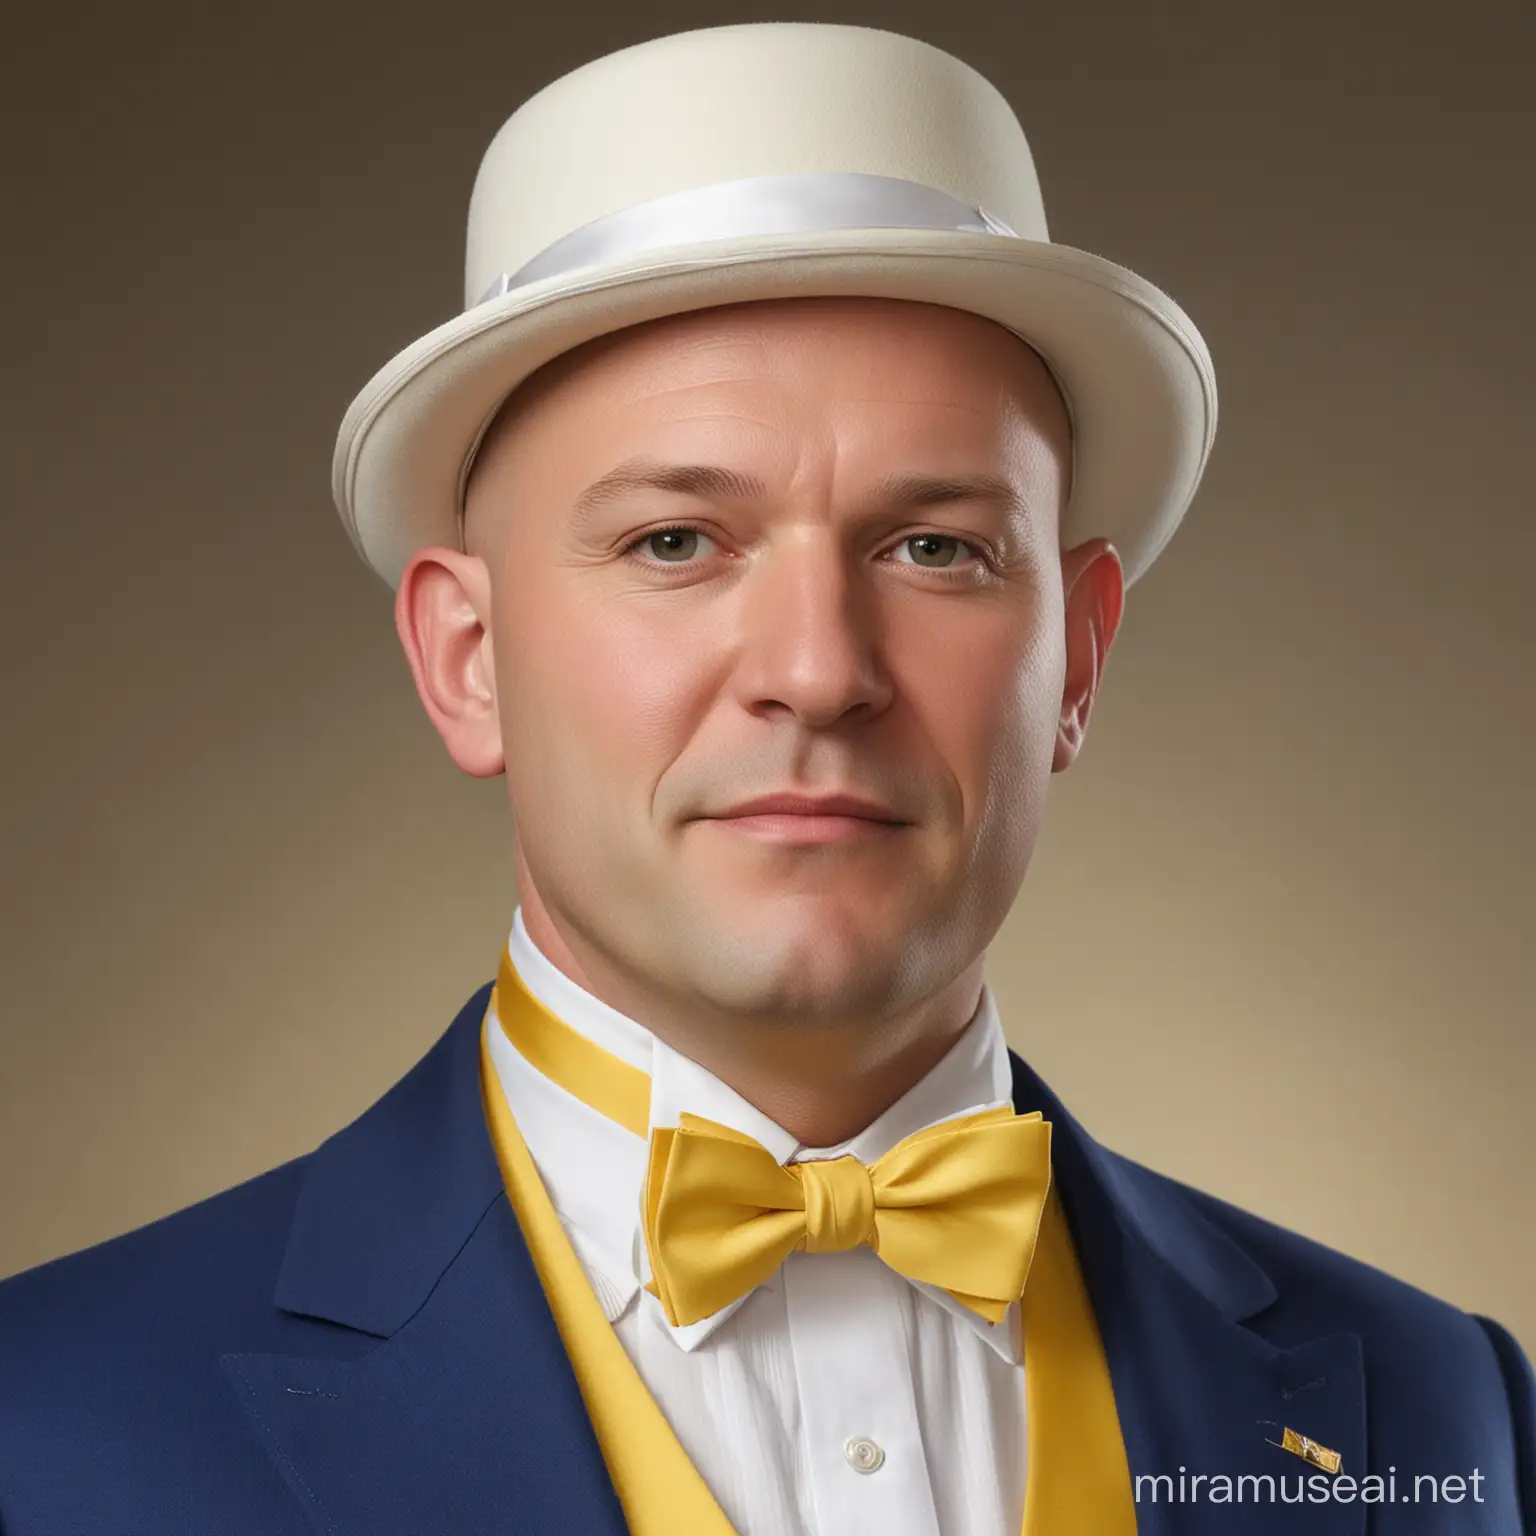 A large bald man with a round face. He wears a blue suit, with a yellow vest underneath, and a white shirt. He has a white bowtie. He wears a small white hat on his head.